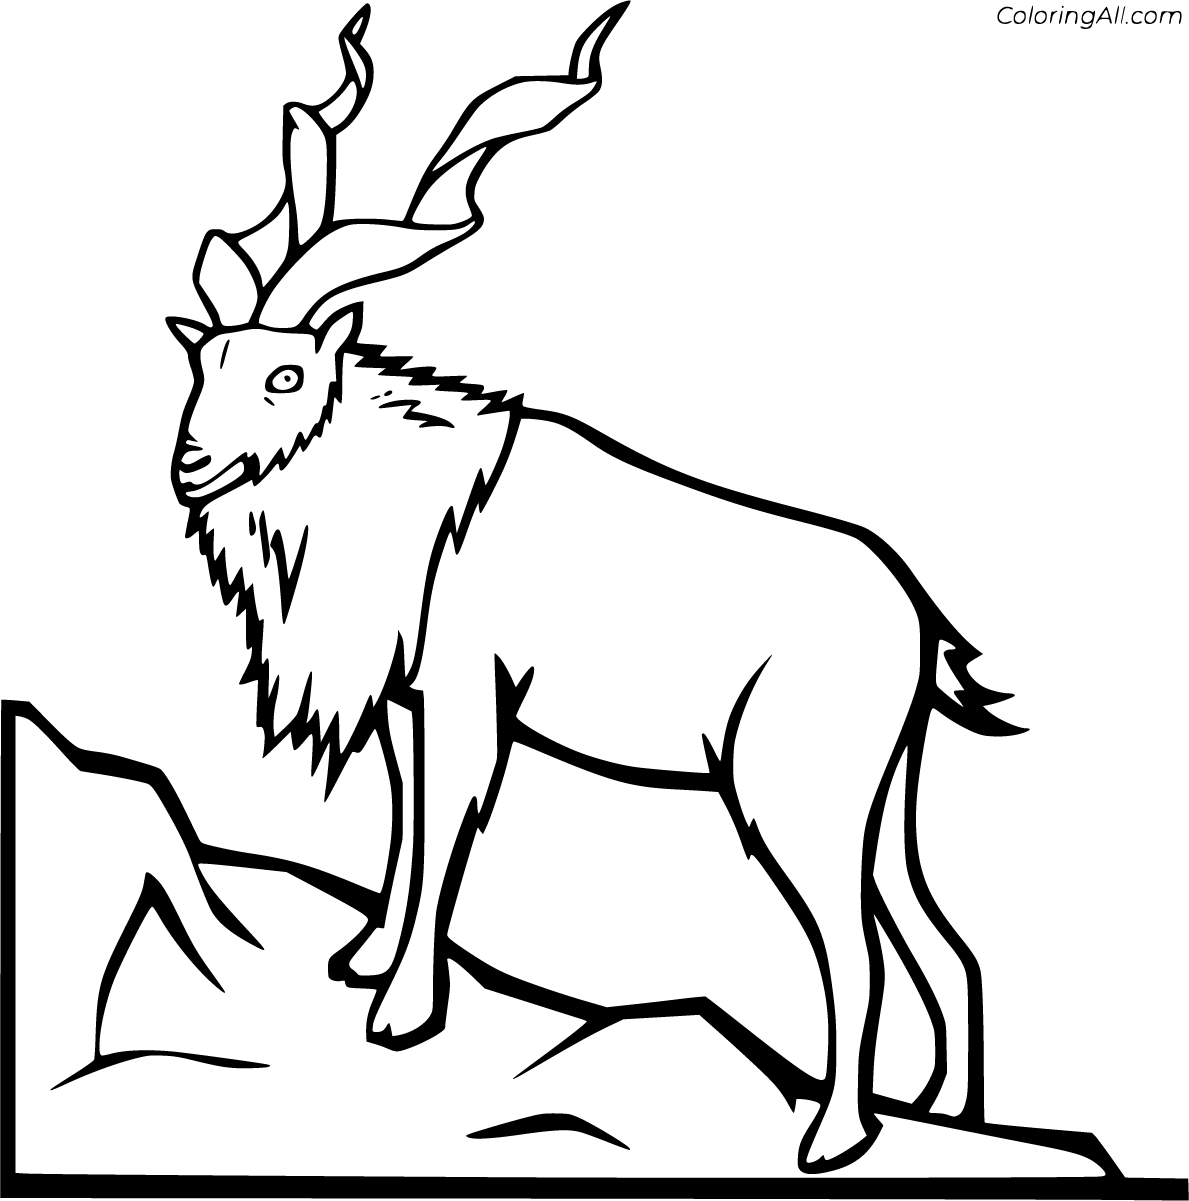 Markhor Coloring Pages - ColoringAll